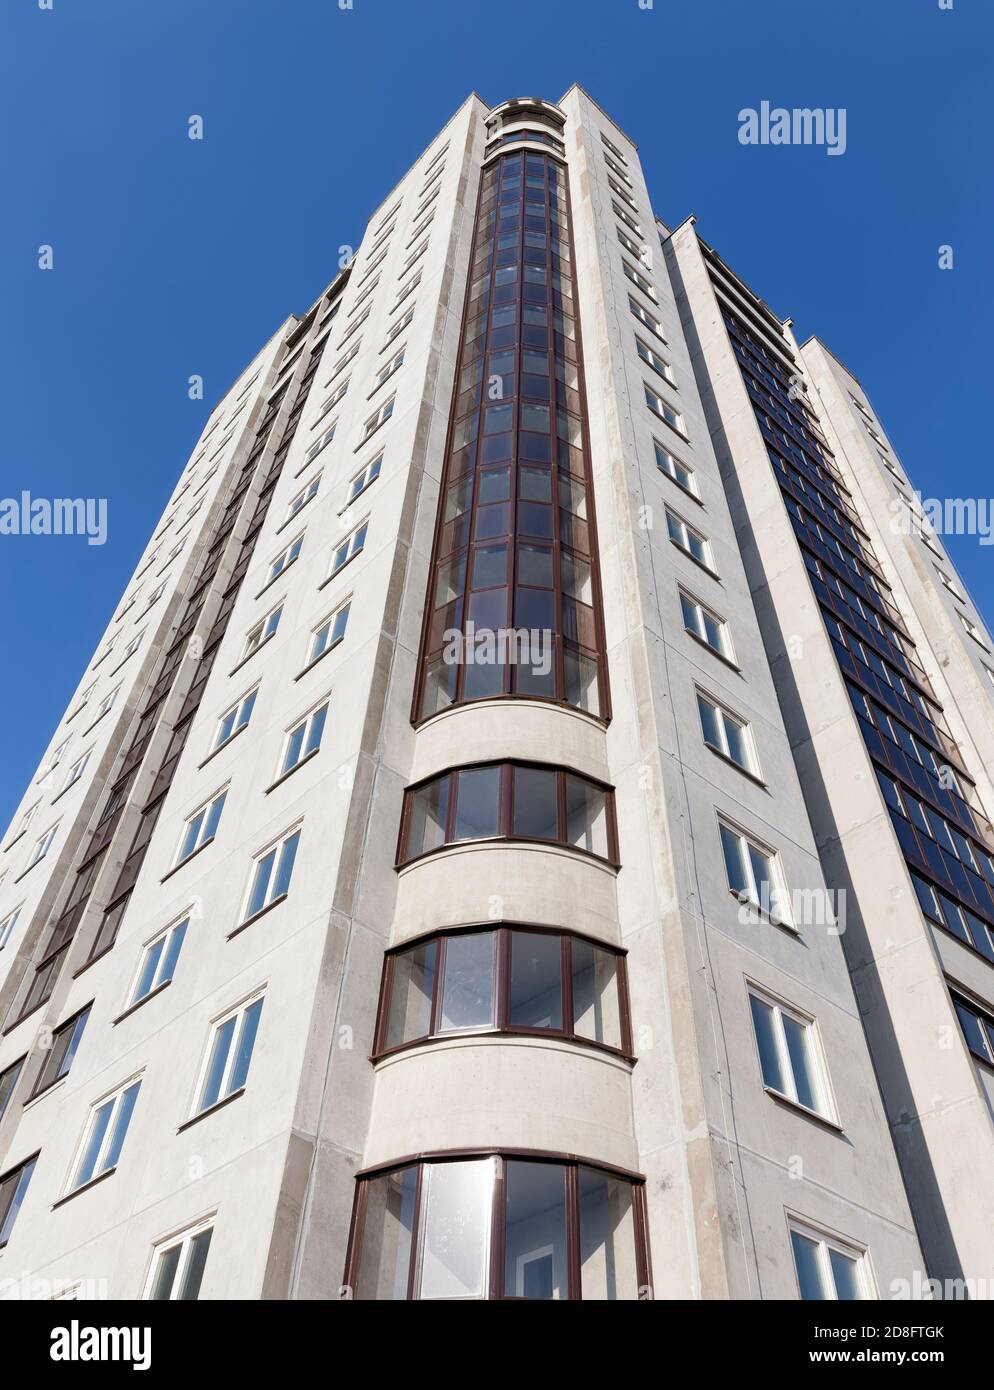 glazed with tinted glass, a new reinforced concrete building Stock Photo